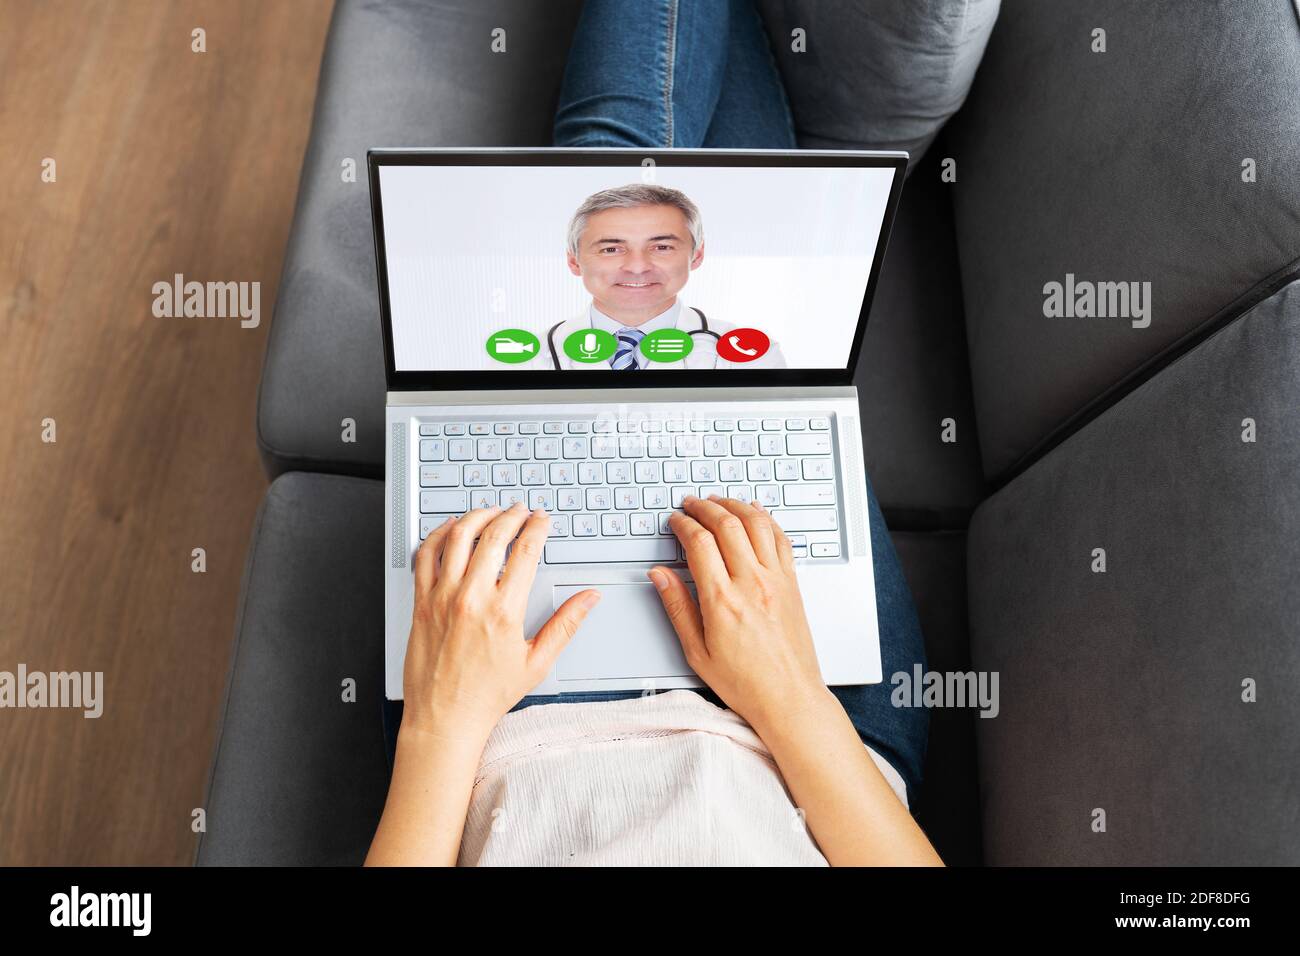 Online Medical Video Conference With Doctor On Laptop Stock Photo